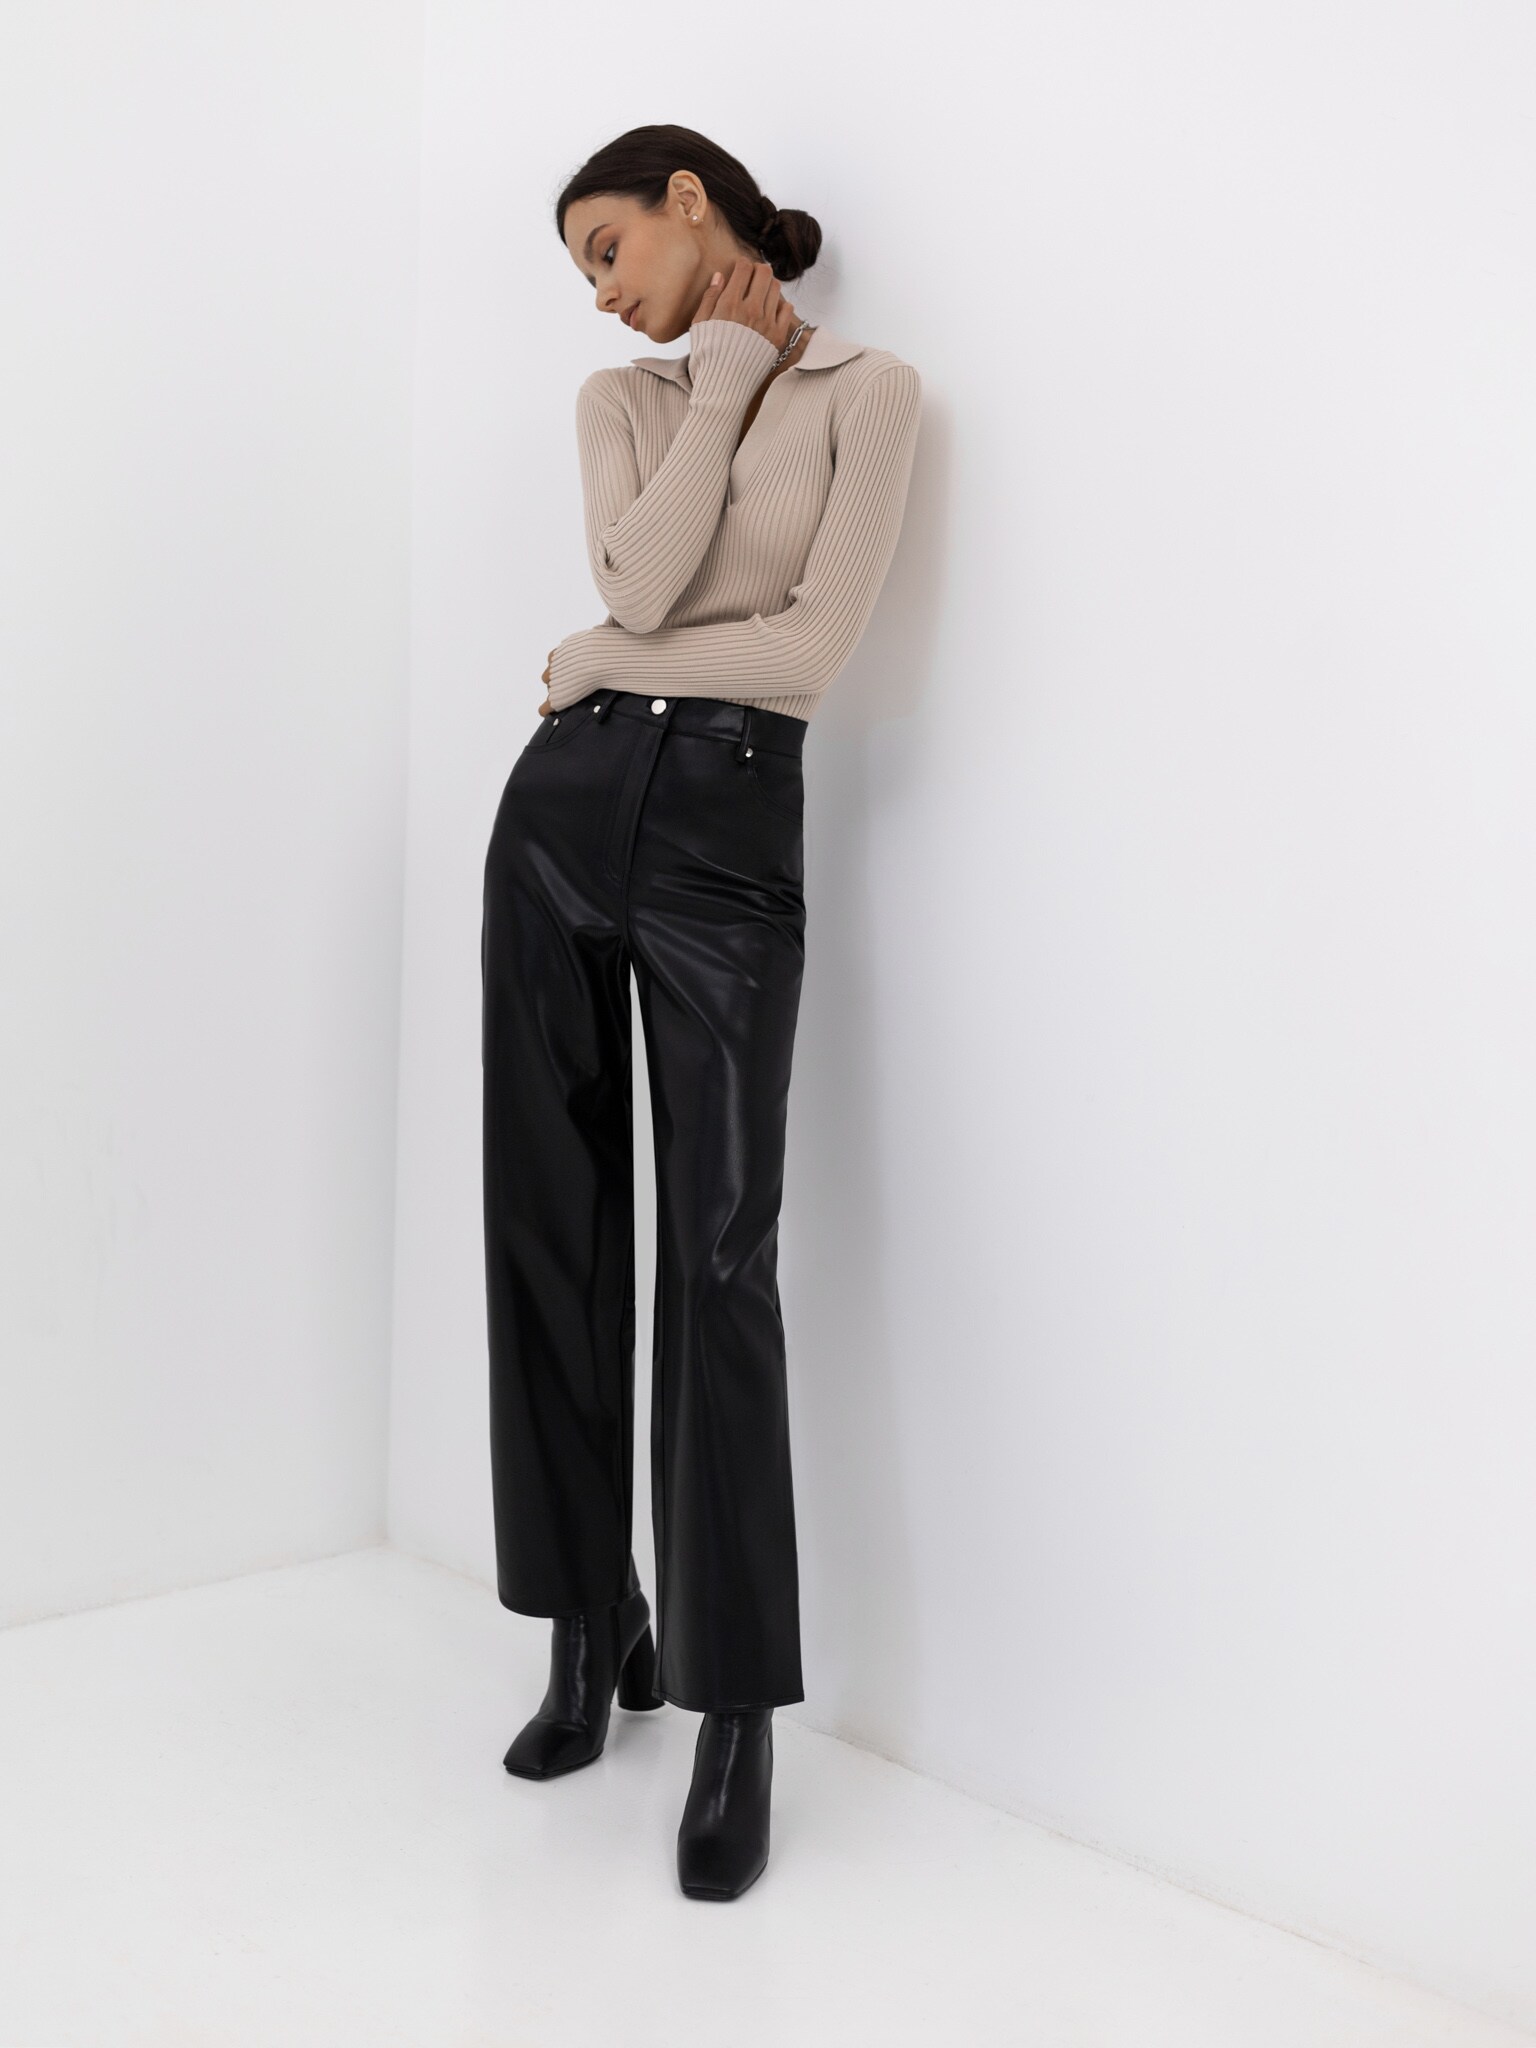 Leather trousers D.Gnak by Kang.D Black size 32 UK - US in Leather -  20184162